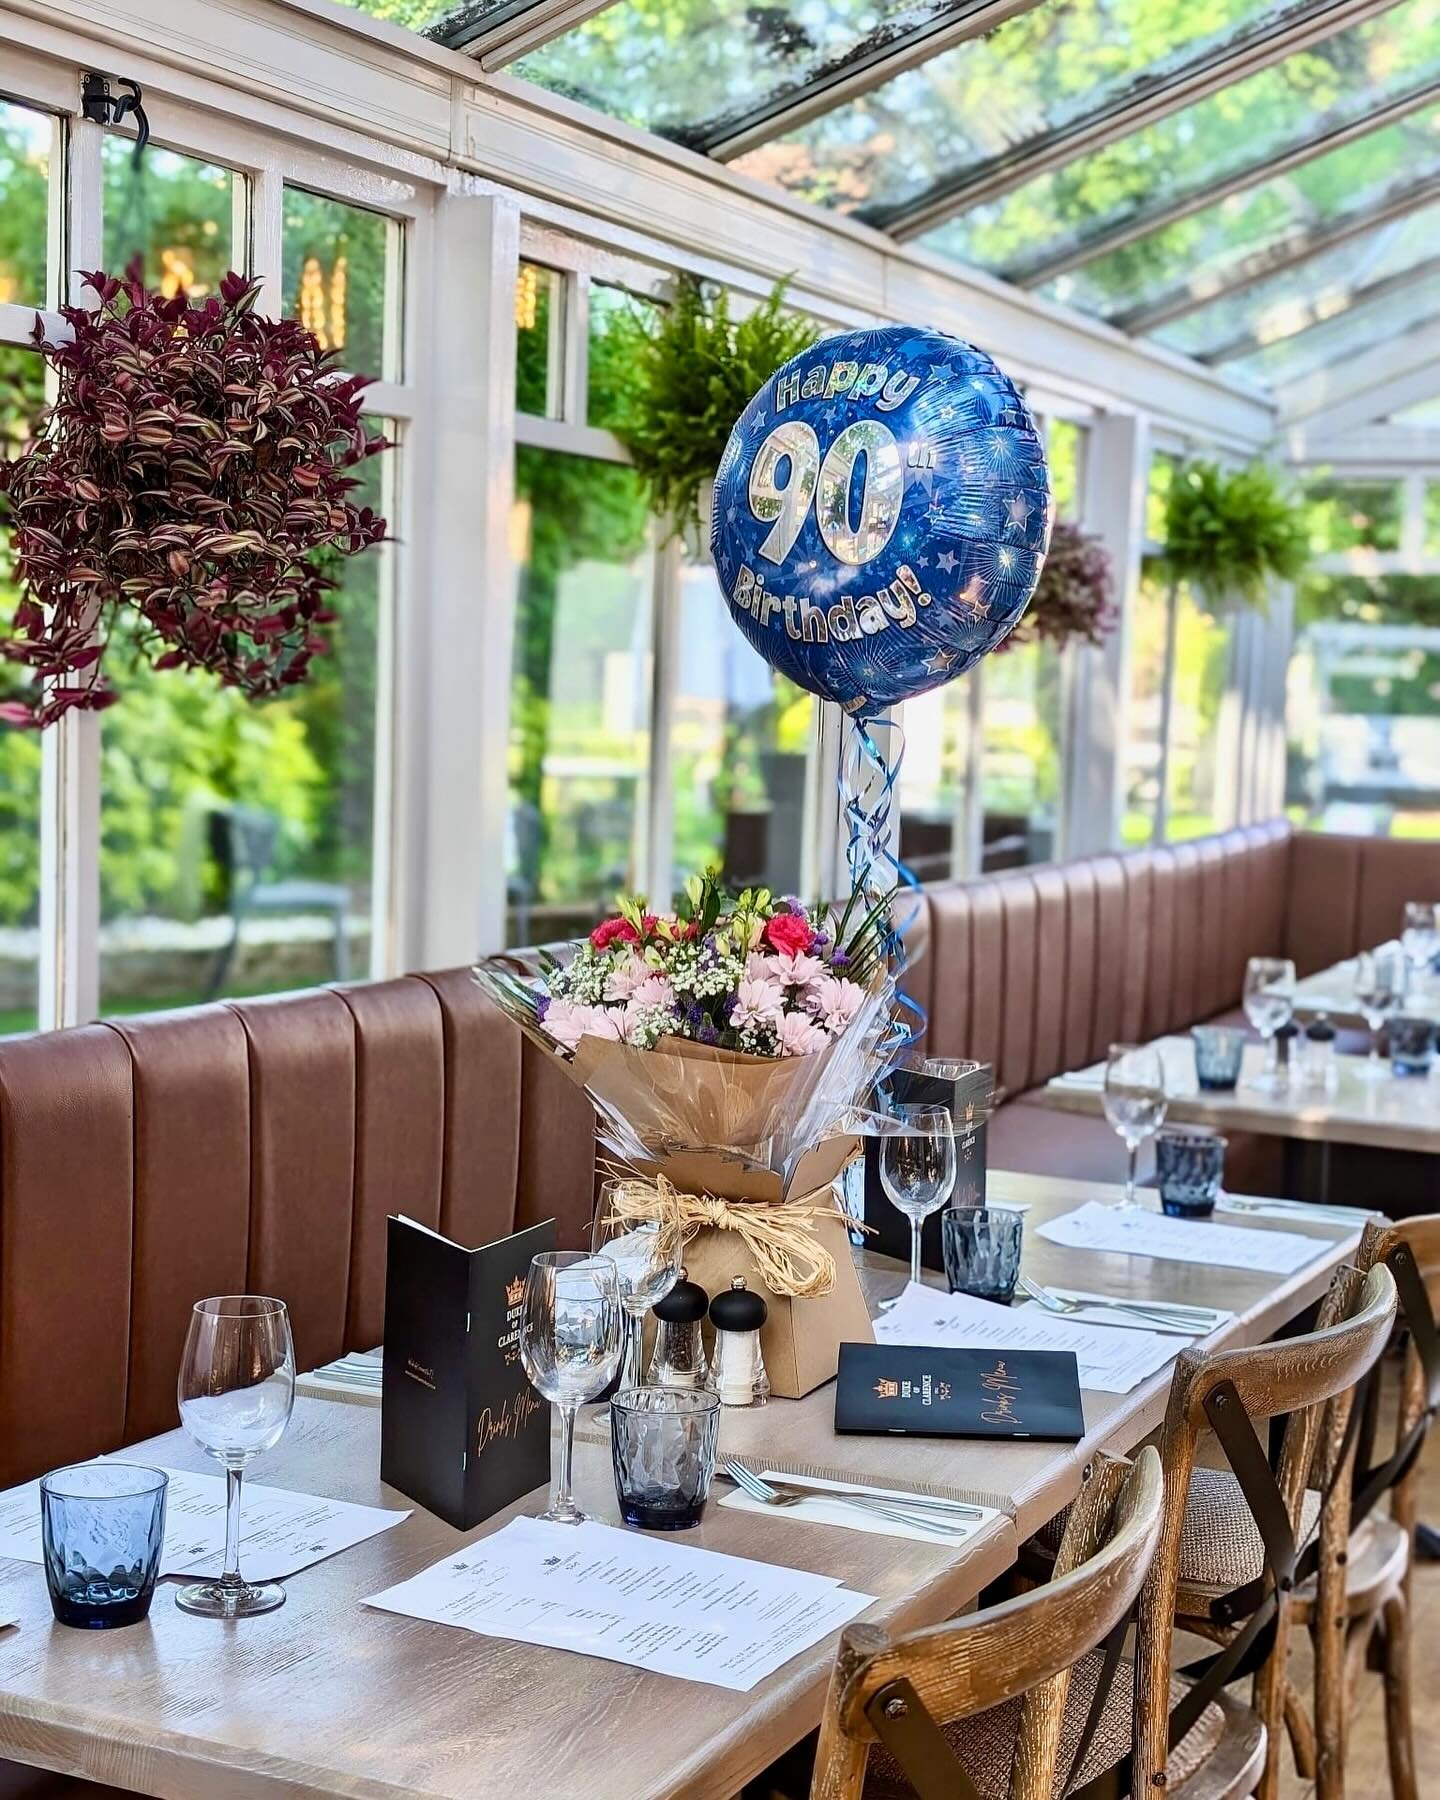 Our conservatory is the perfect place for a special day or celebration! If you&rsquo;re planning one in the near future, give us a call on 020 3005 4777 and we can book a space for you🍽️🍸🎂